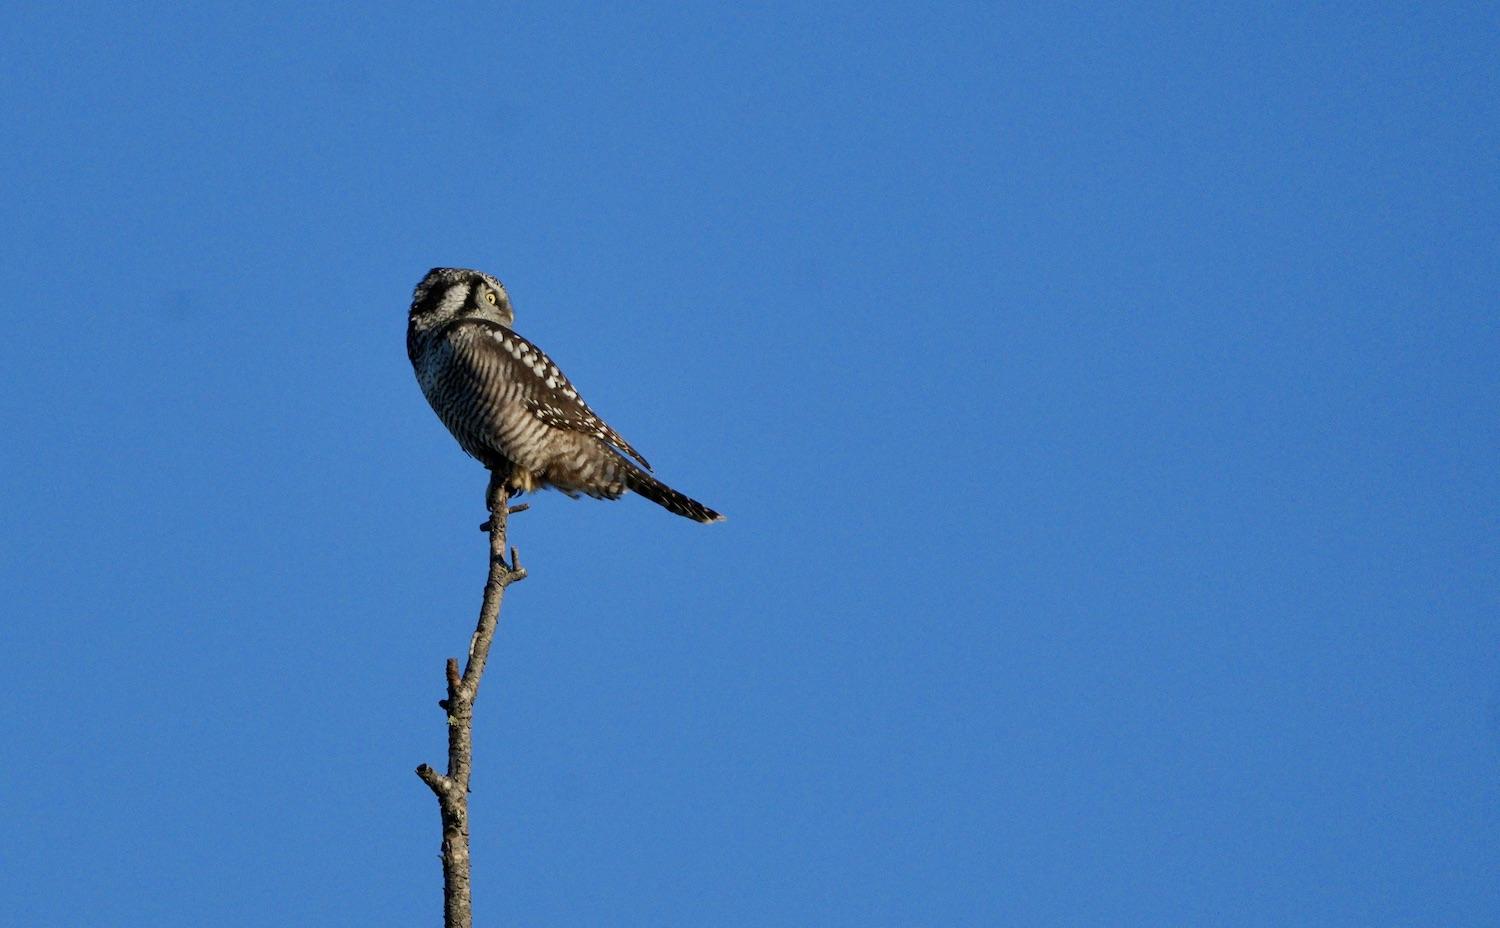 One of the park's 214 bird species is this Northern Hawk Owl.